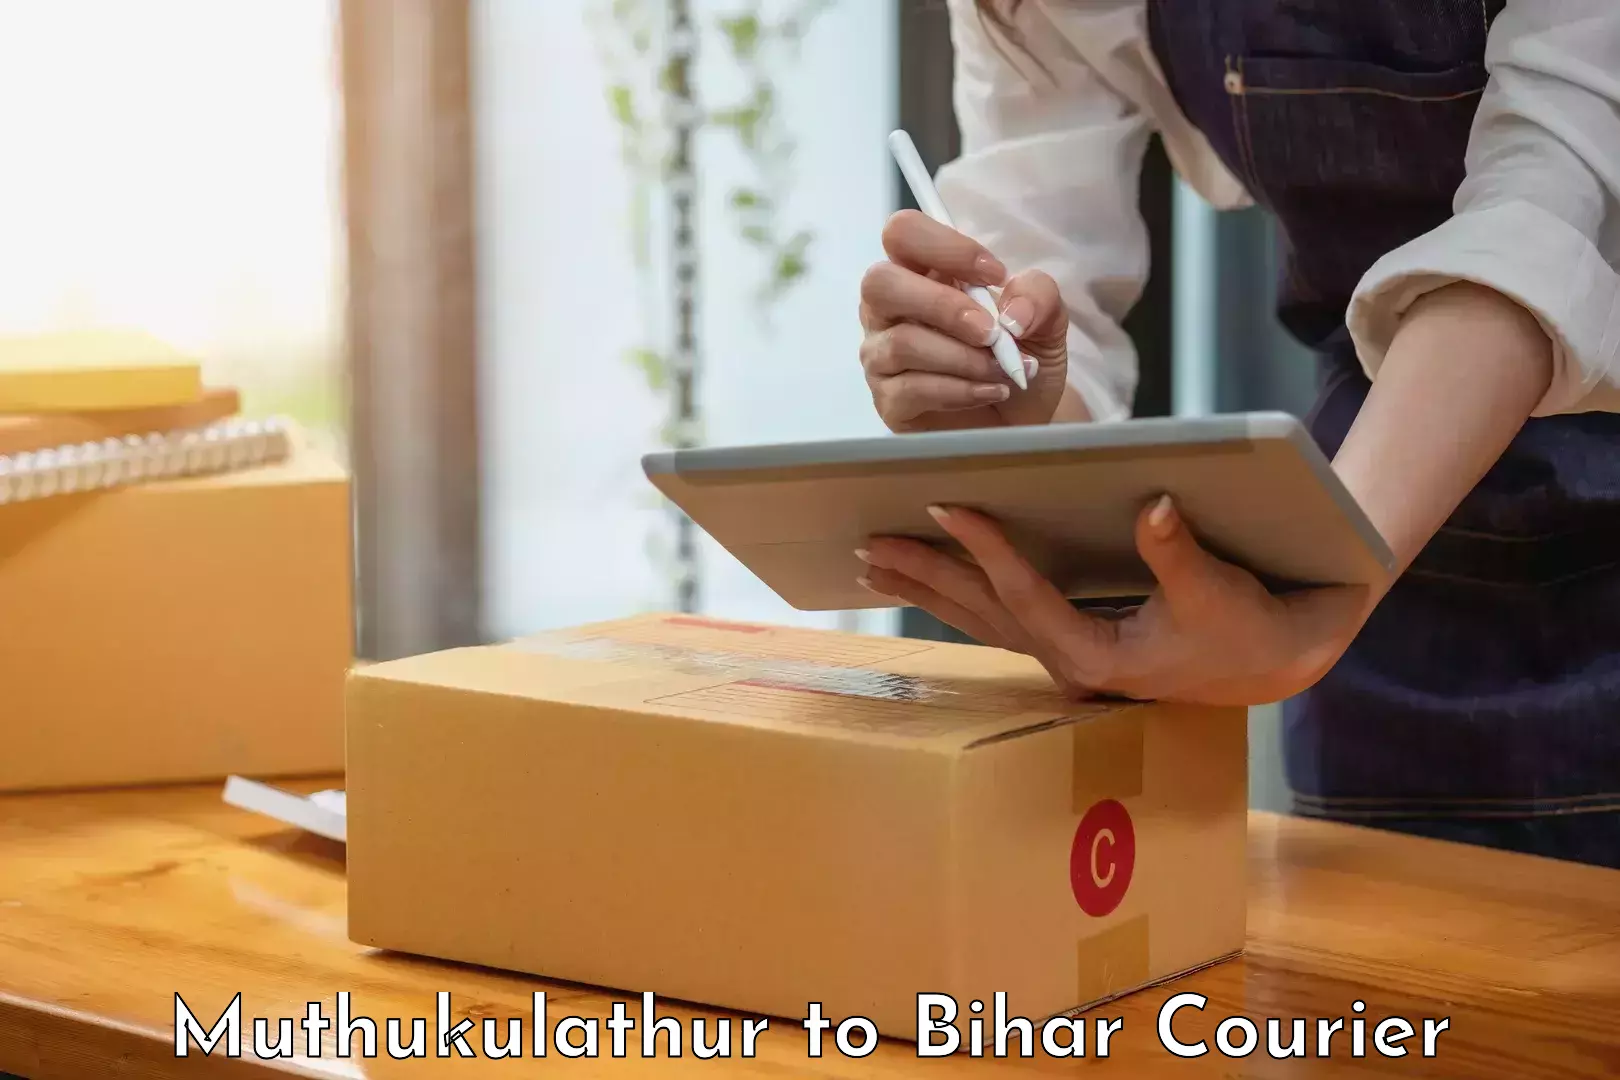 Reliable courier services Muthukulathur to Bhojpur